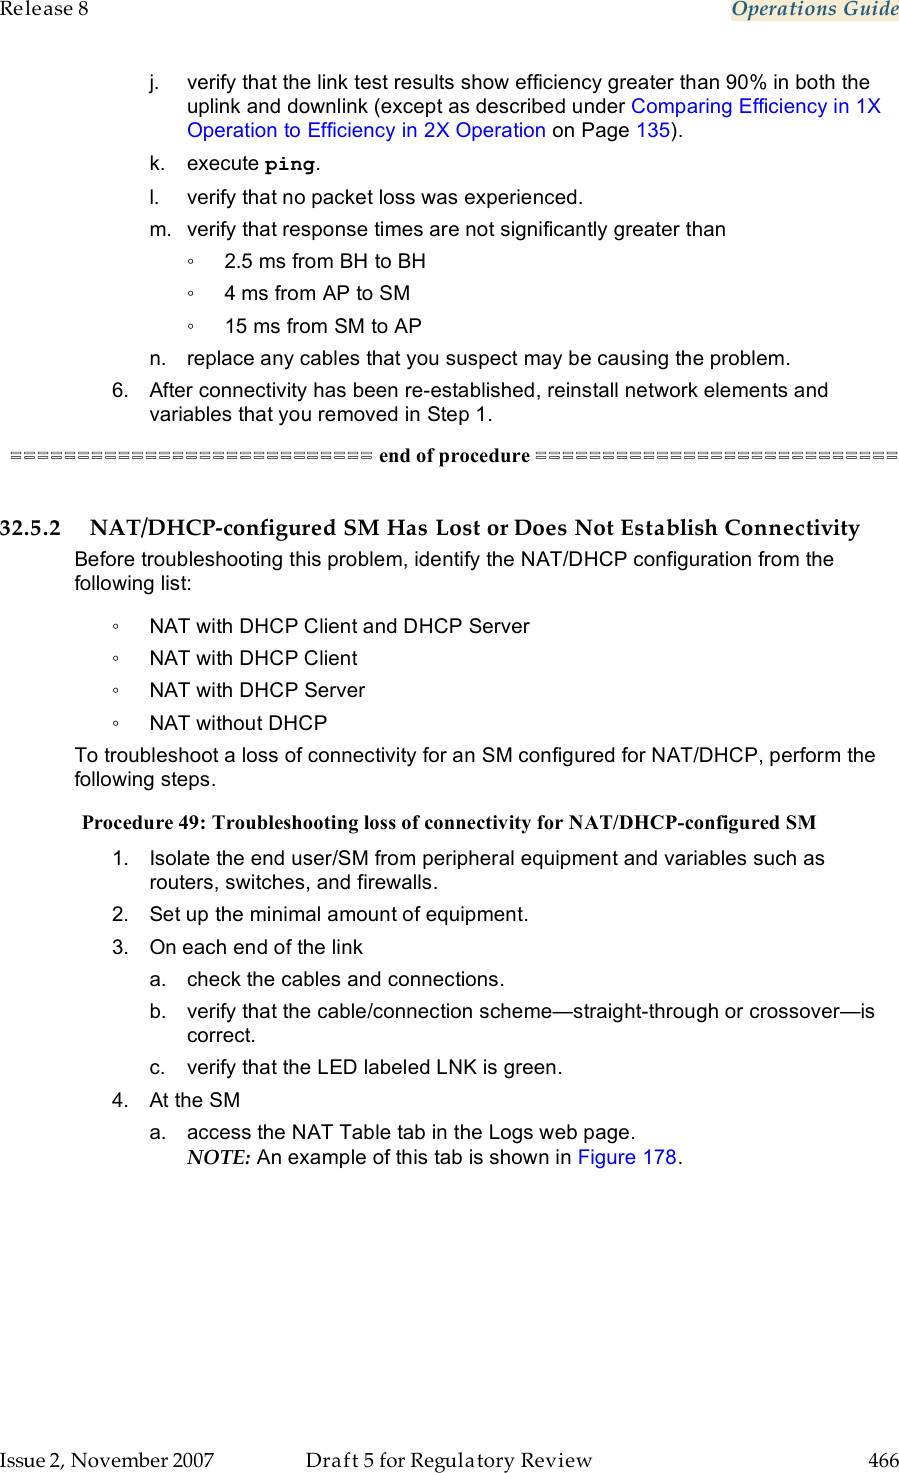 Release 8    Operations Guide   Issue 2, November 2007  Draft 5 for Regulatory Review  466     j.  verify that the link test results show efficiency greater than 90% in both the uplink and downlink (except as described under Comparing Efficiency in 1X Operation to Efficiency in 2X Operation on Page 135). k.  execute ping. l.  verify that no packet loss was experienced. m.  verify that response times are not significantly greater than  ◦  2.5 ms from BH to BH ◦  4 ms from AP to SM ◦  15 ms from SM to AP n.  replace any cables that you suspect may be causing the problem. 6.  After connectivity has been re-established, reinstall network elements and variables that you removed in Step 1. =========================== end of procedure ===========================  32.5.2 NAT/DHCP-configured SM Has Lost or Does Not Establish Connectivity Before troubleshooting this problem, identify the NAT/DHCP configuration from the following list: ◦  NAT with DHCP Client and DHCP Server ◦  NAT with DHCP Client ◦  NAT with DHCP Server ◦  NAT without DHCP To troubleshoot a loss of connectivity for an SM configured for NAT/DHCP, perform the following steps. Procedure 49: Troubleshooting loss of connectivity for NAT/DHCP-configured SM 1.  Isolate the end user/SM from peripheral equipment and variables such as routers, switches, and firewalls. 2.  Set up the minimal amount of equipment. 3.  On each end of the link a.  check the cables and connections.  b.  verify that the cable/connection scheme—straight-through or crossover—is correct. c.  verify that the LED labeled LNK is green. 4.  At the SM a.  access the NAT Table tab in the Logs web page. NOTE: An example of this tab is shown in Figure 178.  